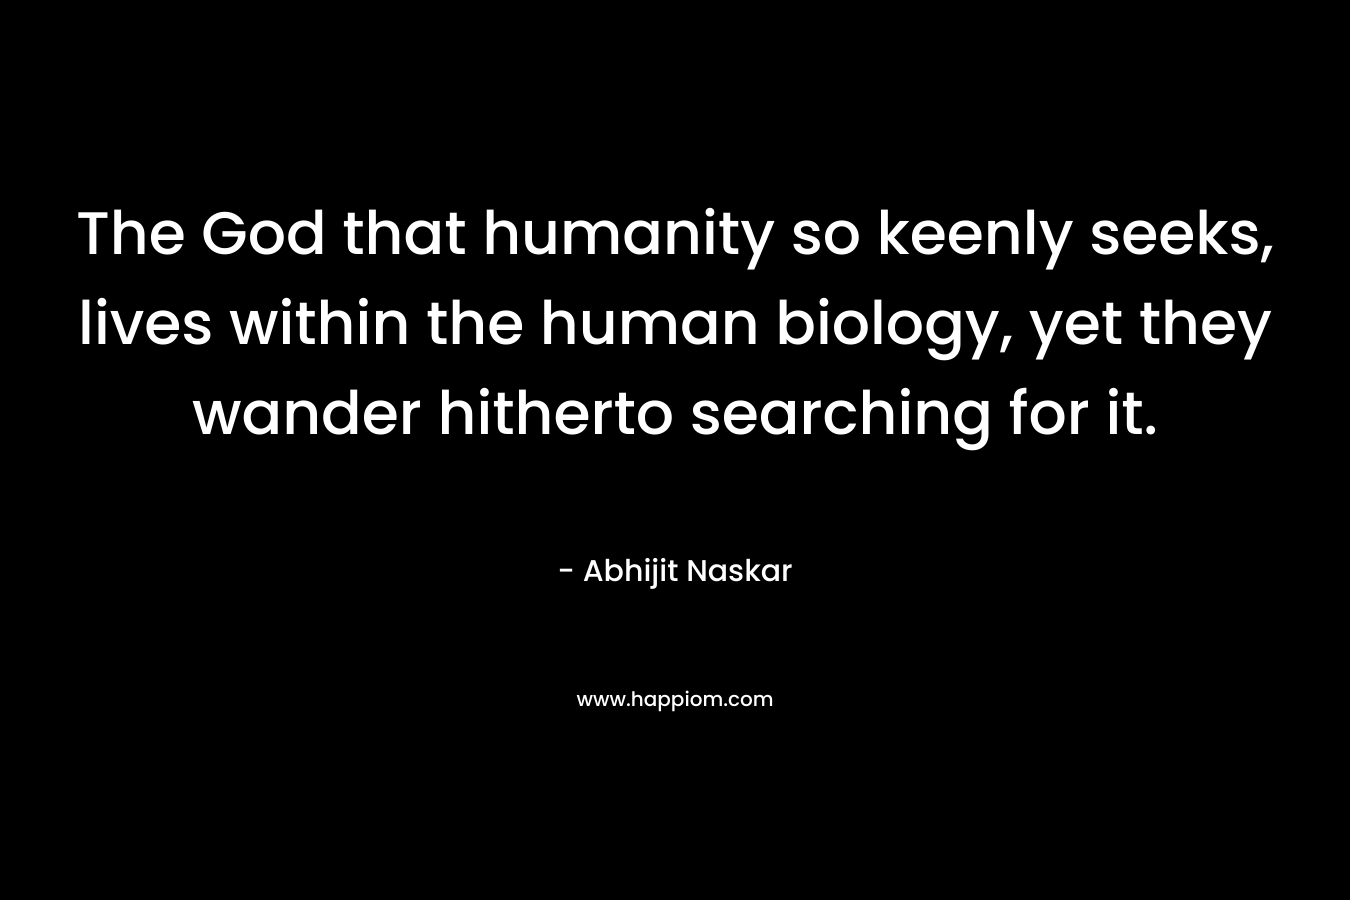 The God that humanity so keenly seeks, lives within the human biology, yet they wander hitherto searching for it.